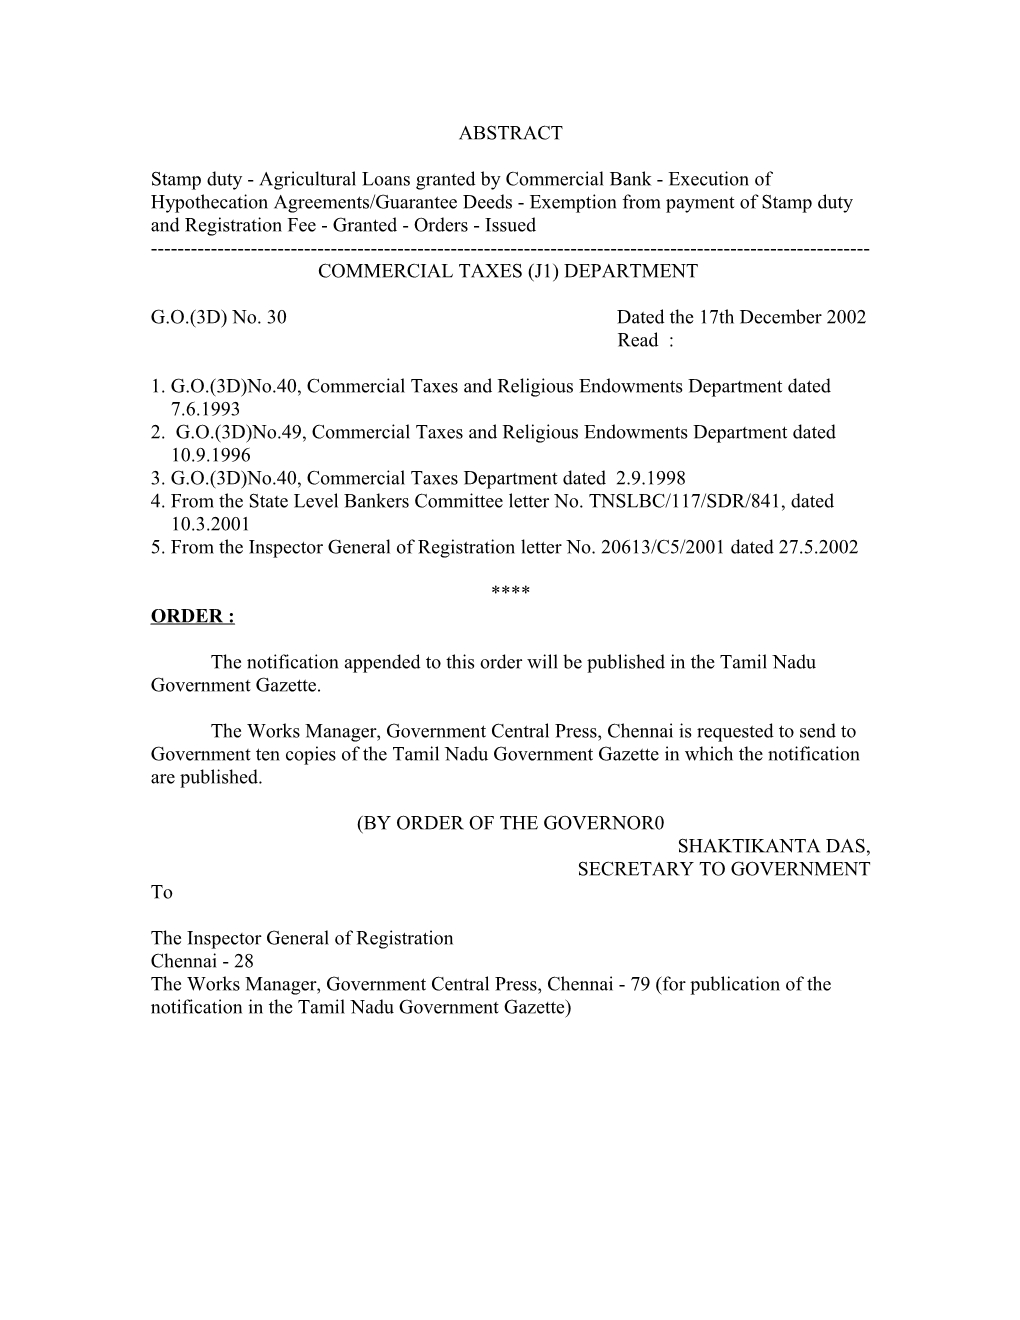 1. G.O.(3D)No.40, Commercial Taxes and Religious Endowments Department Dated